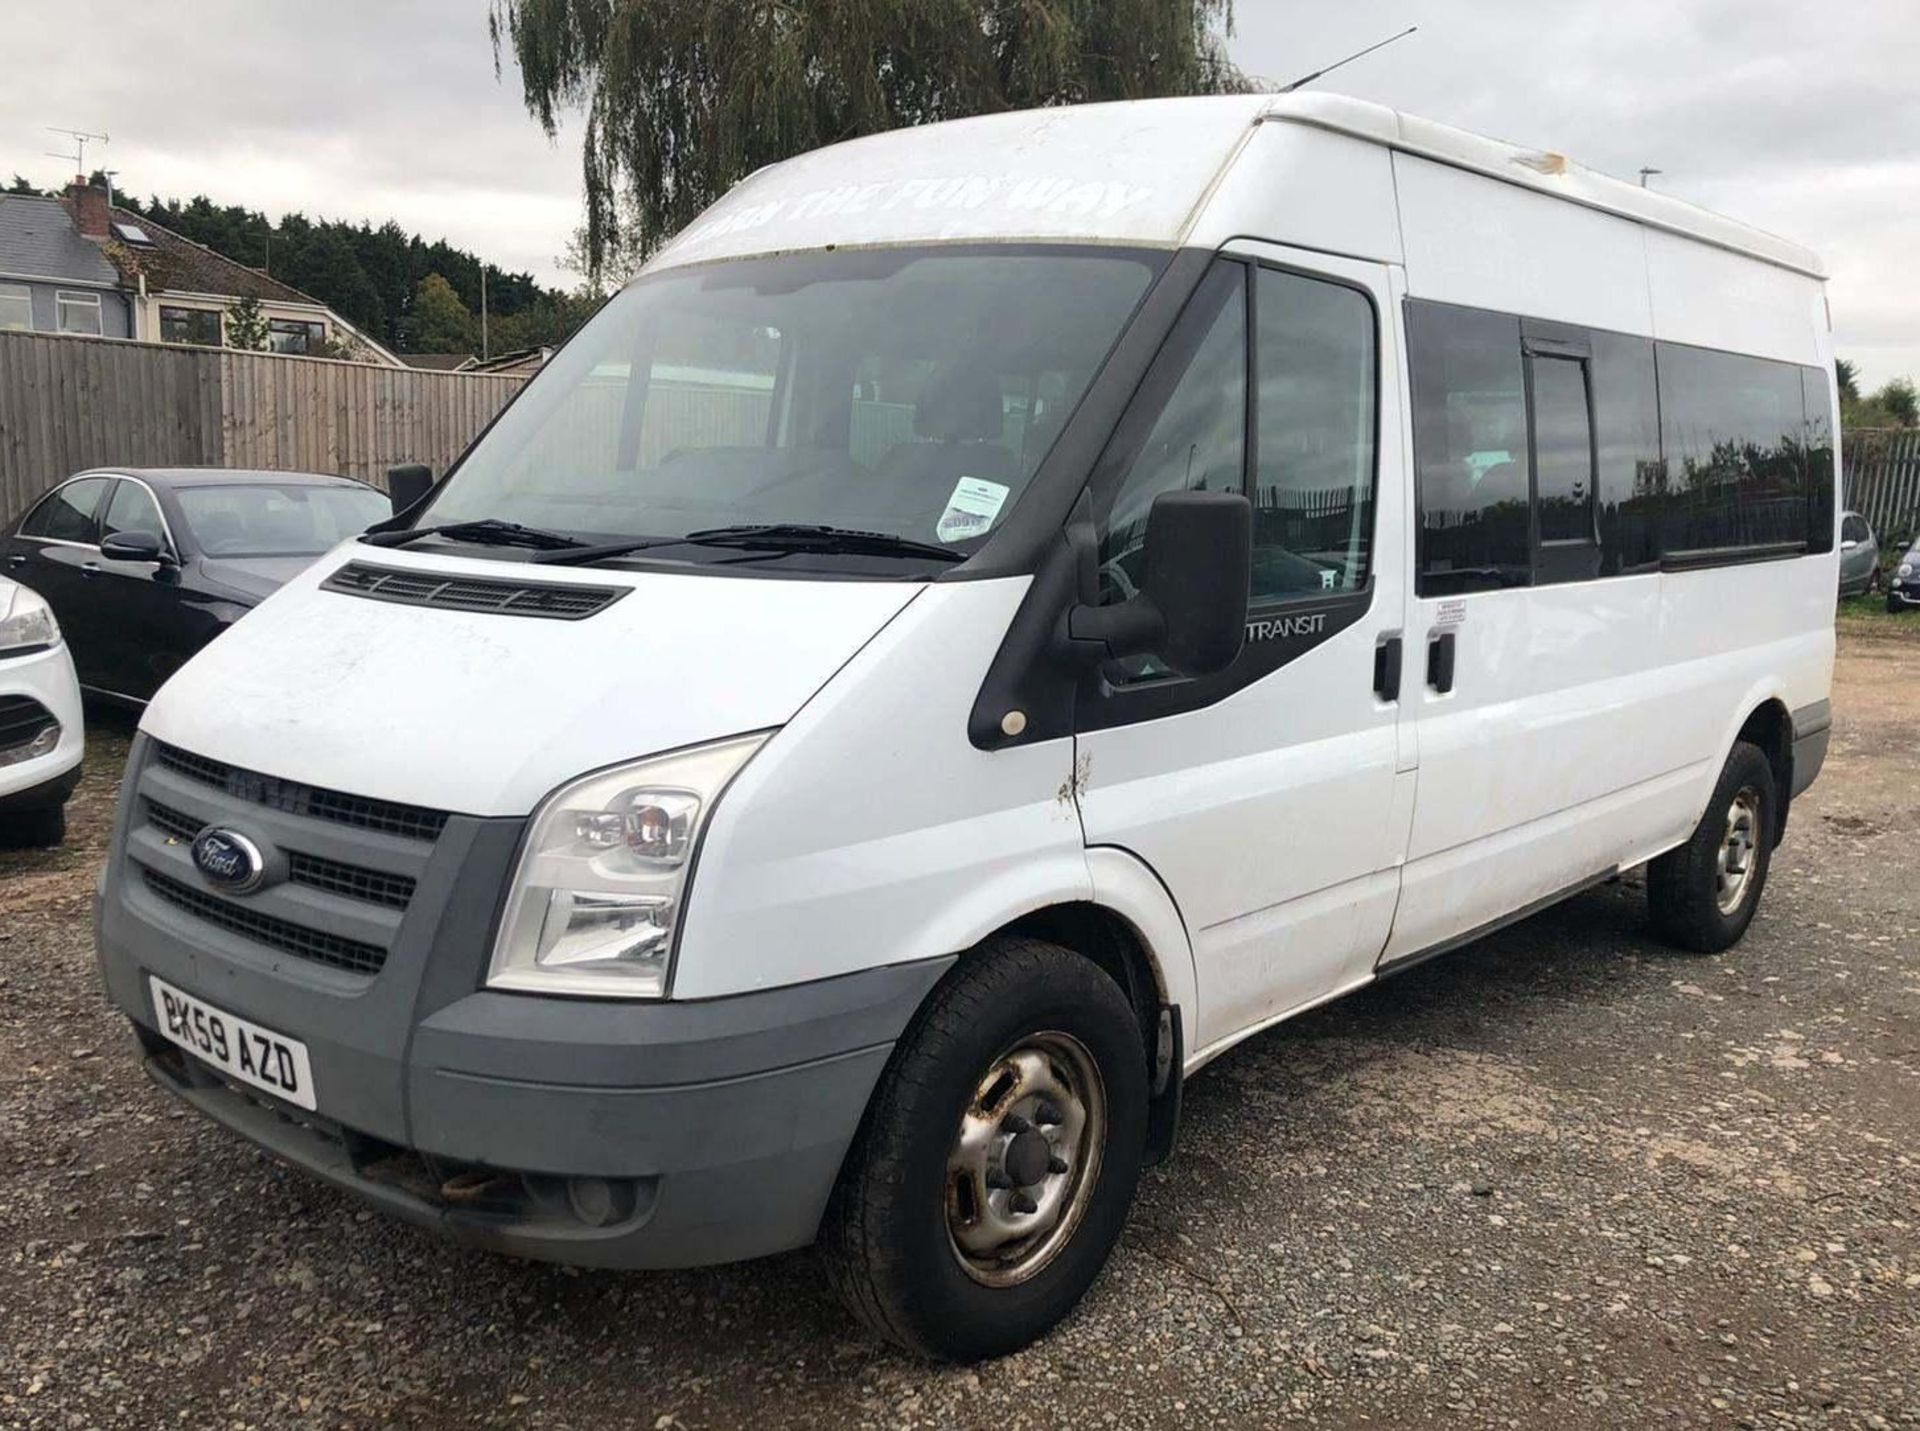 2009 Ford Transit 2.4D 15 Seat Minibus - CL505 - NO VAT ON THE HAMMER - Location: Corby, Northampton - Image 3 of 11